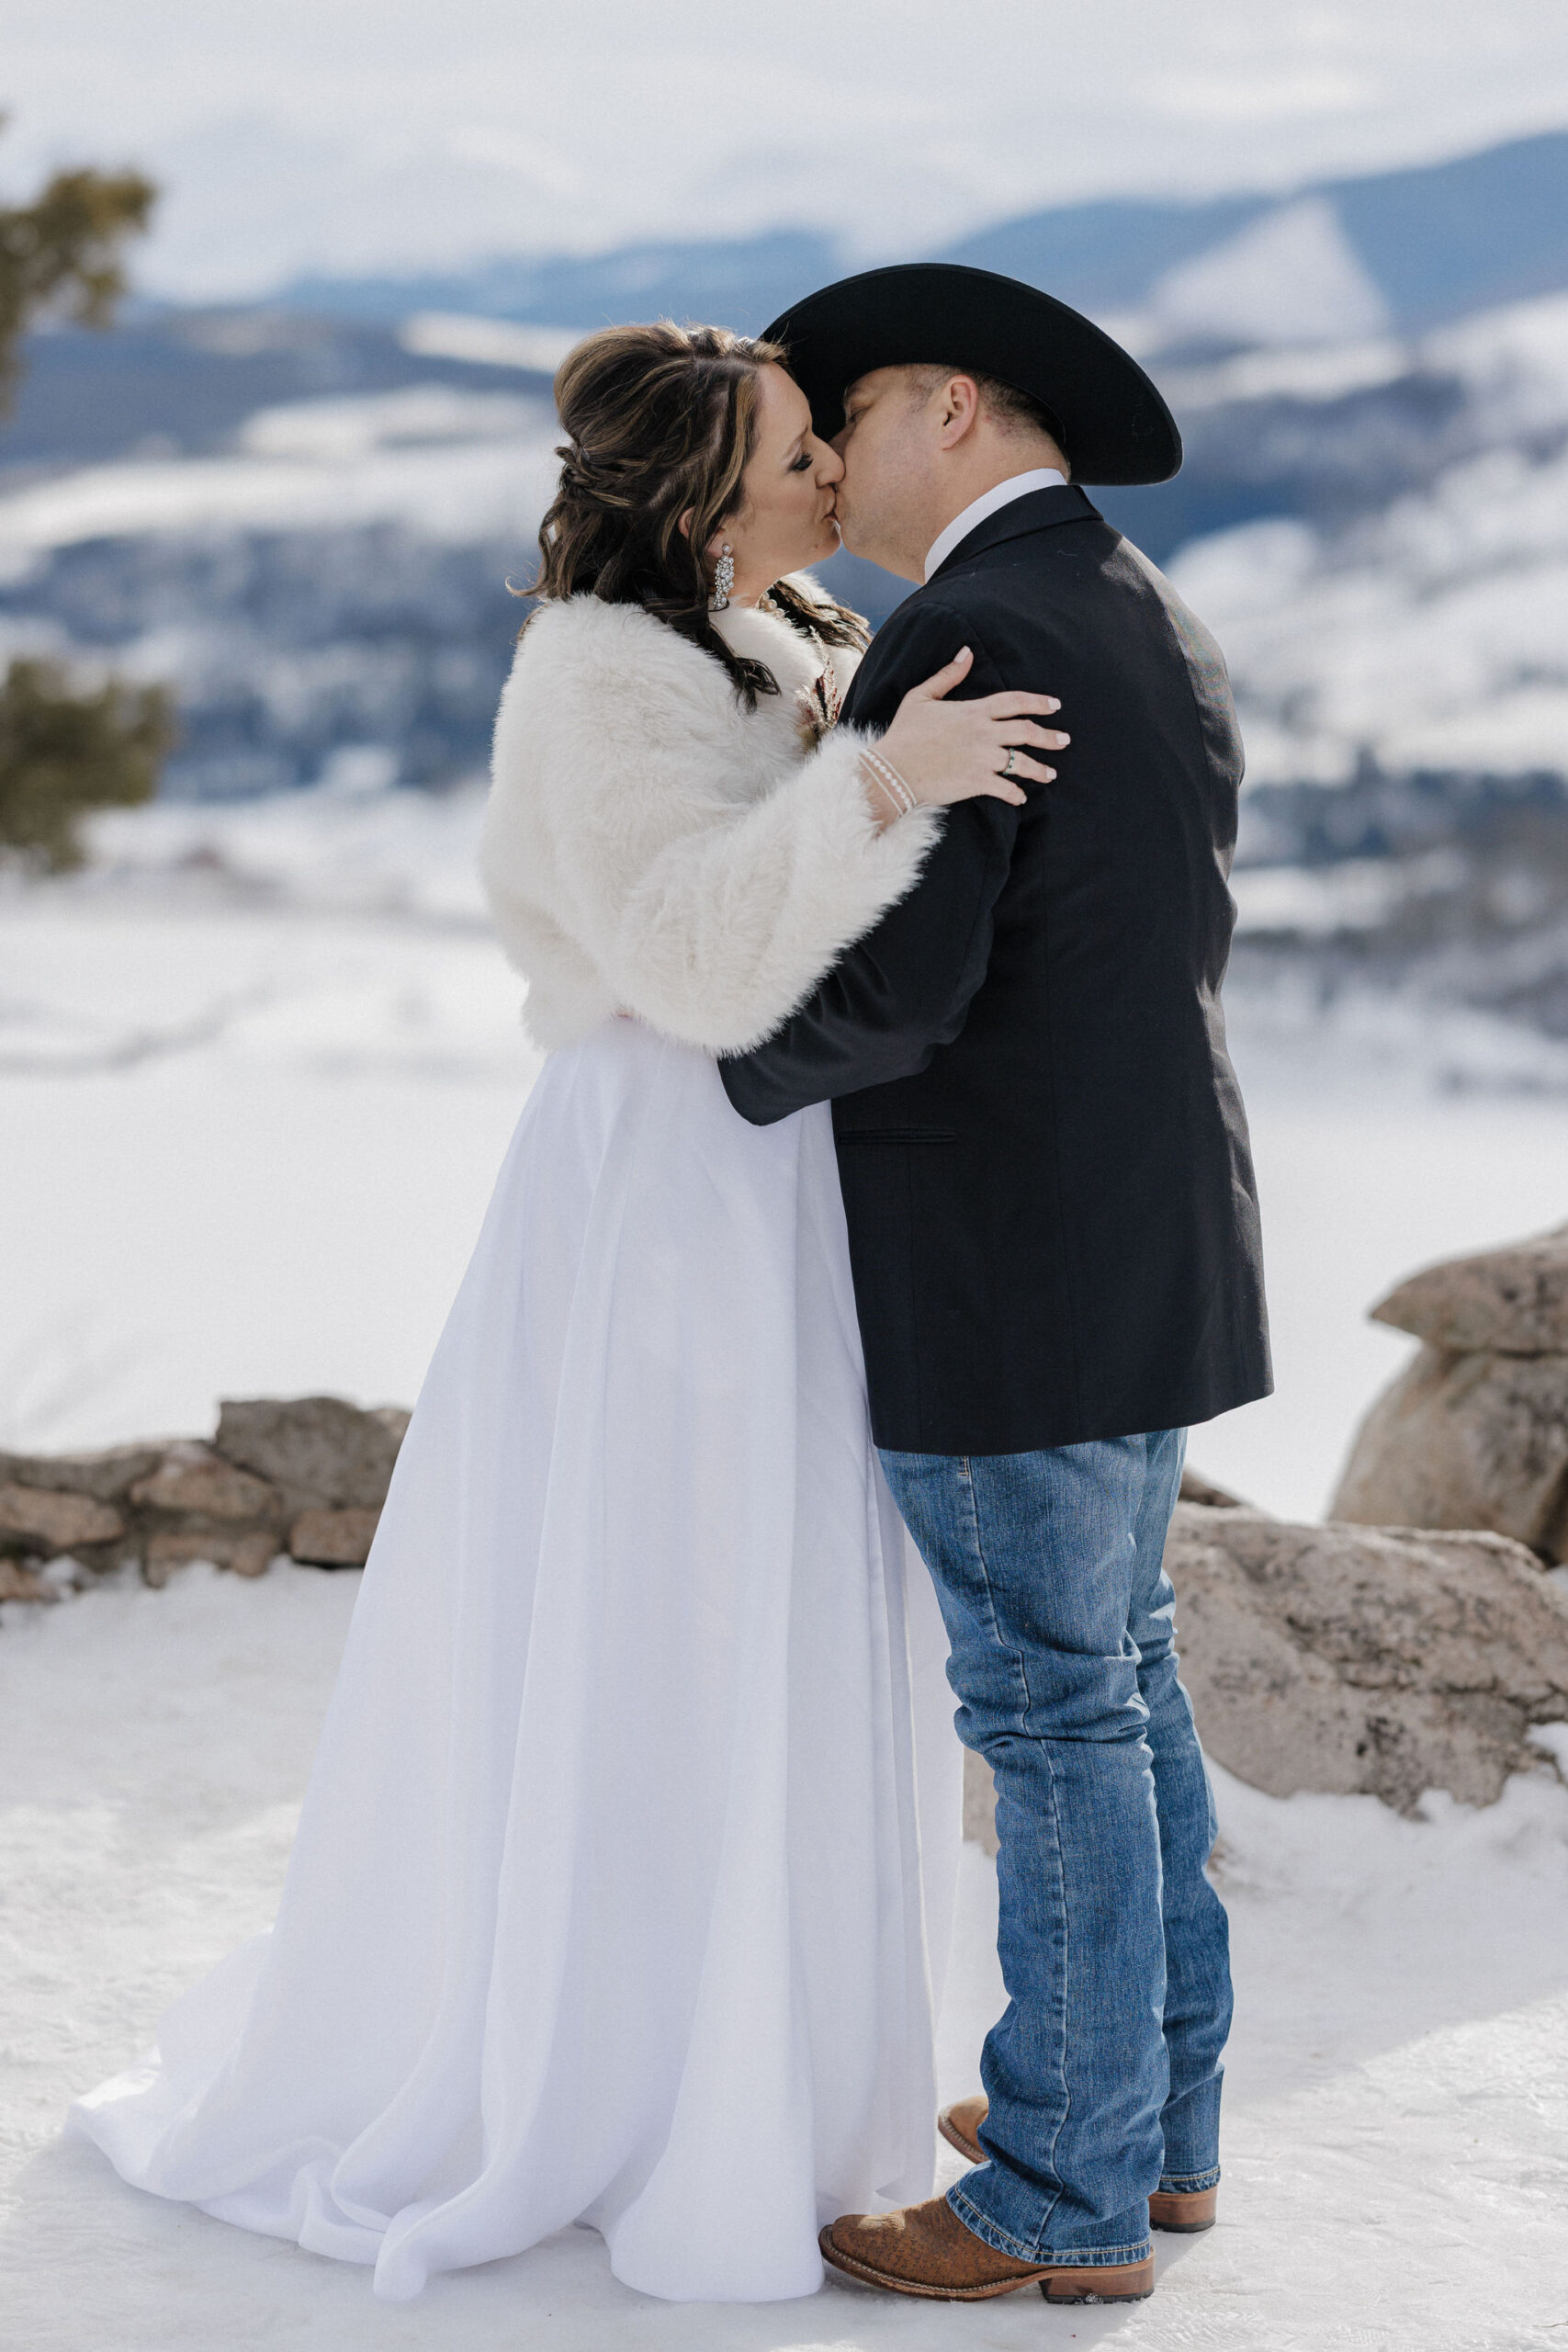 Bride and groom share first kiss during Colorado mountain elopement.